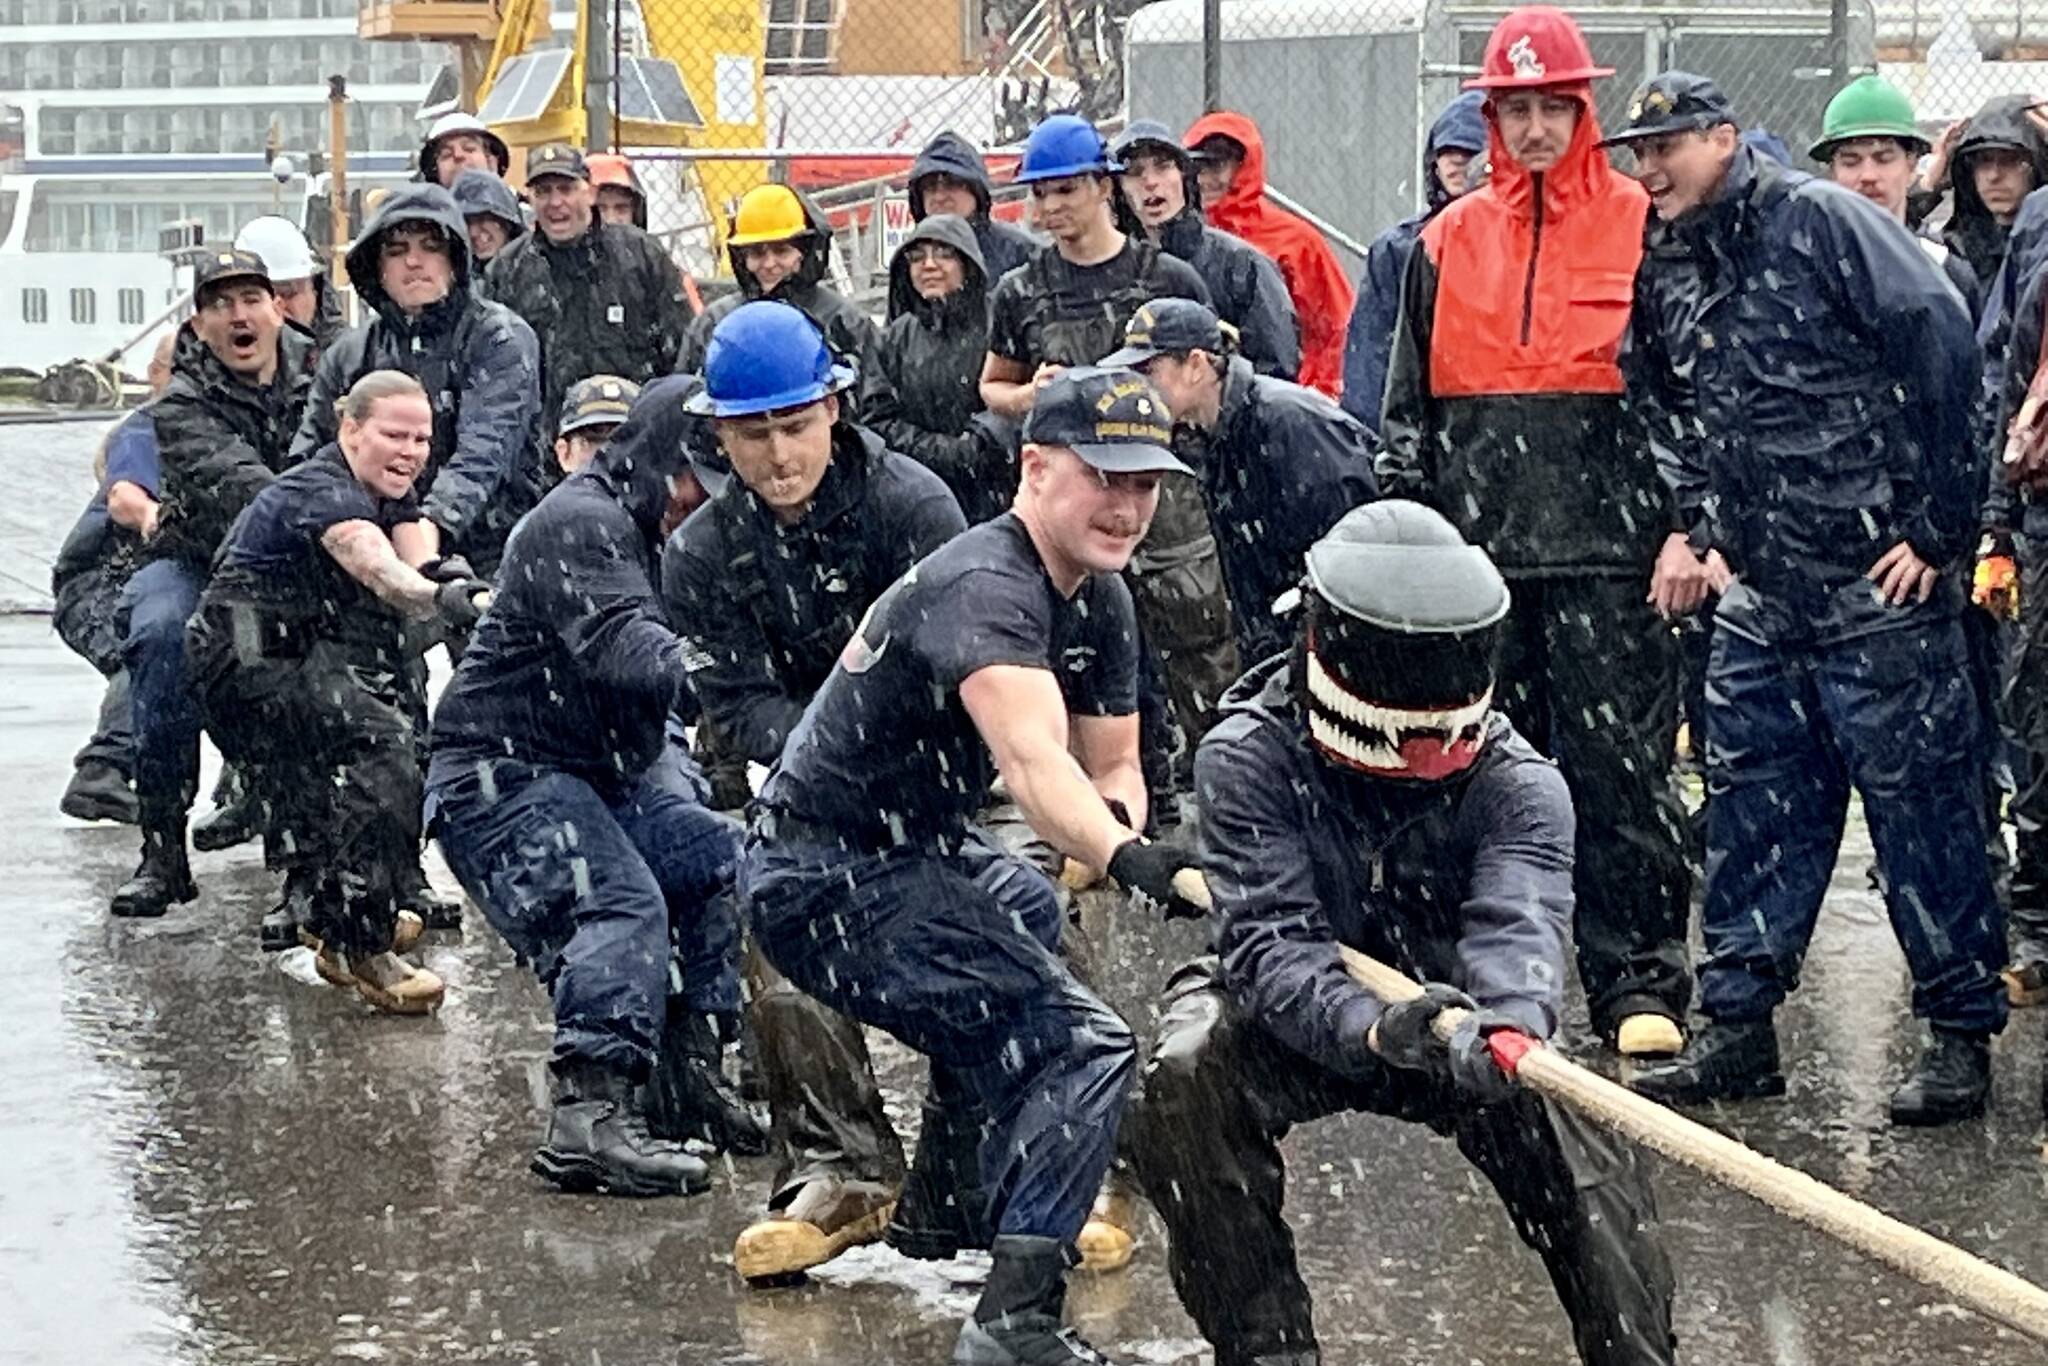 Team Elm faces off against Team Cypress in a battle of tug of war during the Coast Guard’s annual Buoy Tender Olympics on Wednesday at the Coast Guard Station Juneau. (Jonson Kuhn / Juneau Empire)